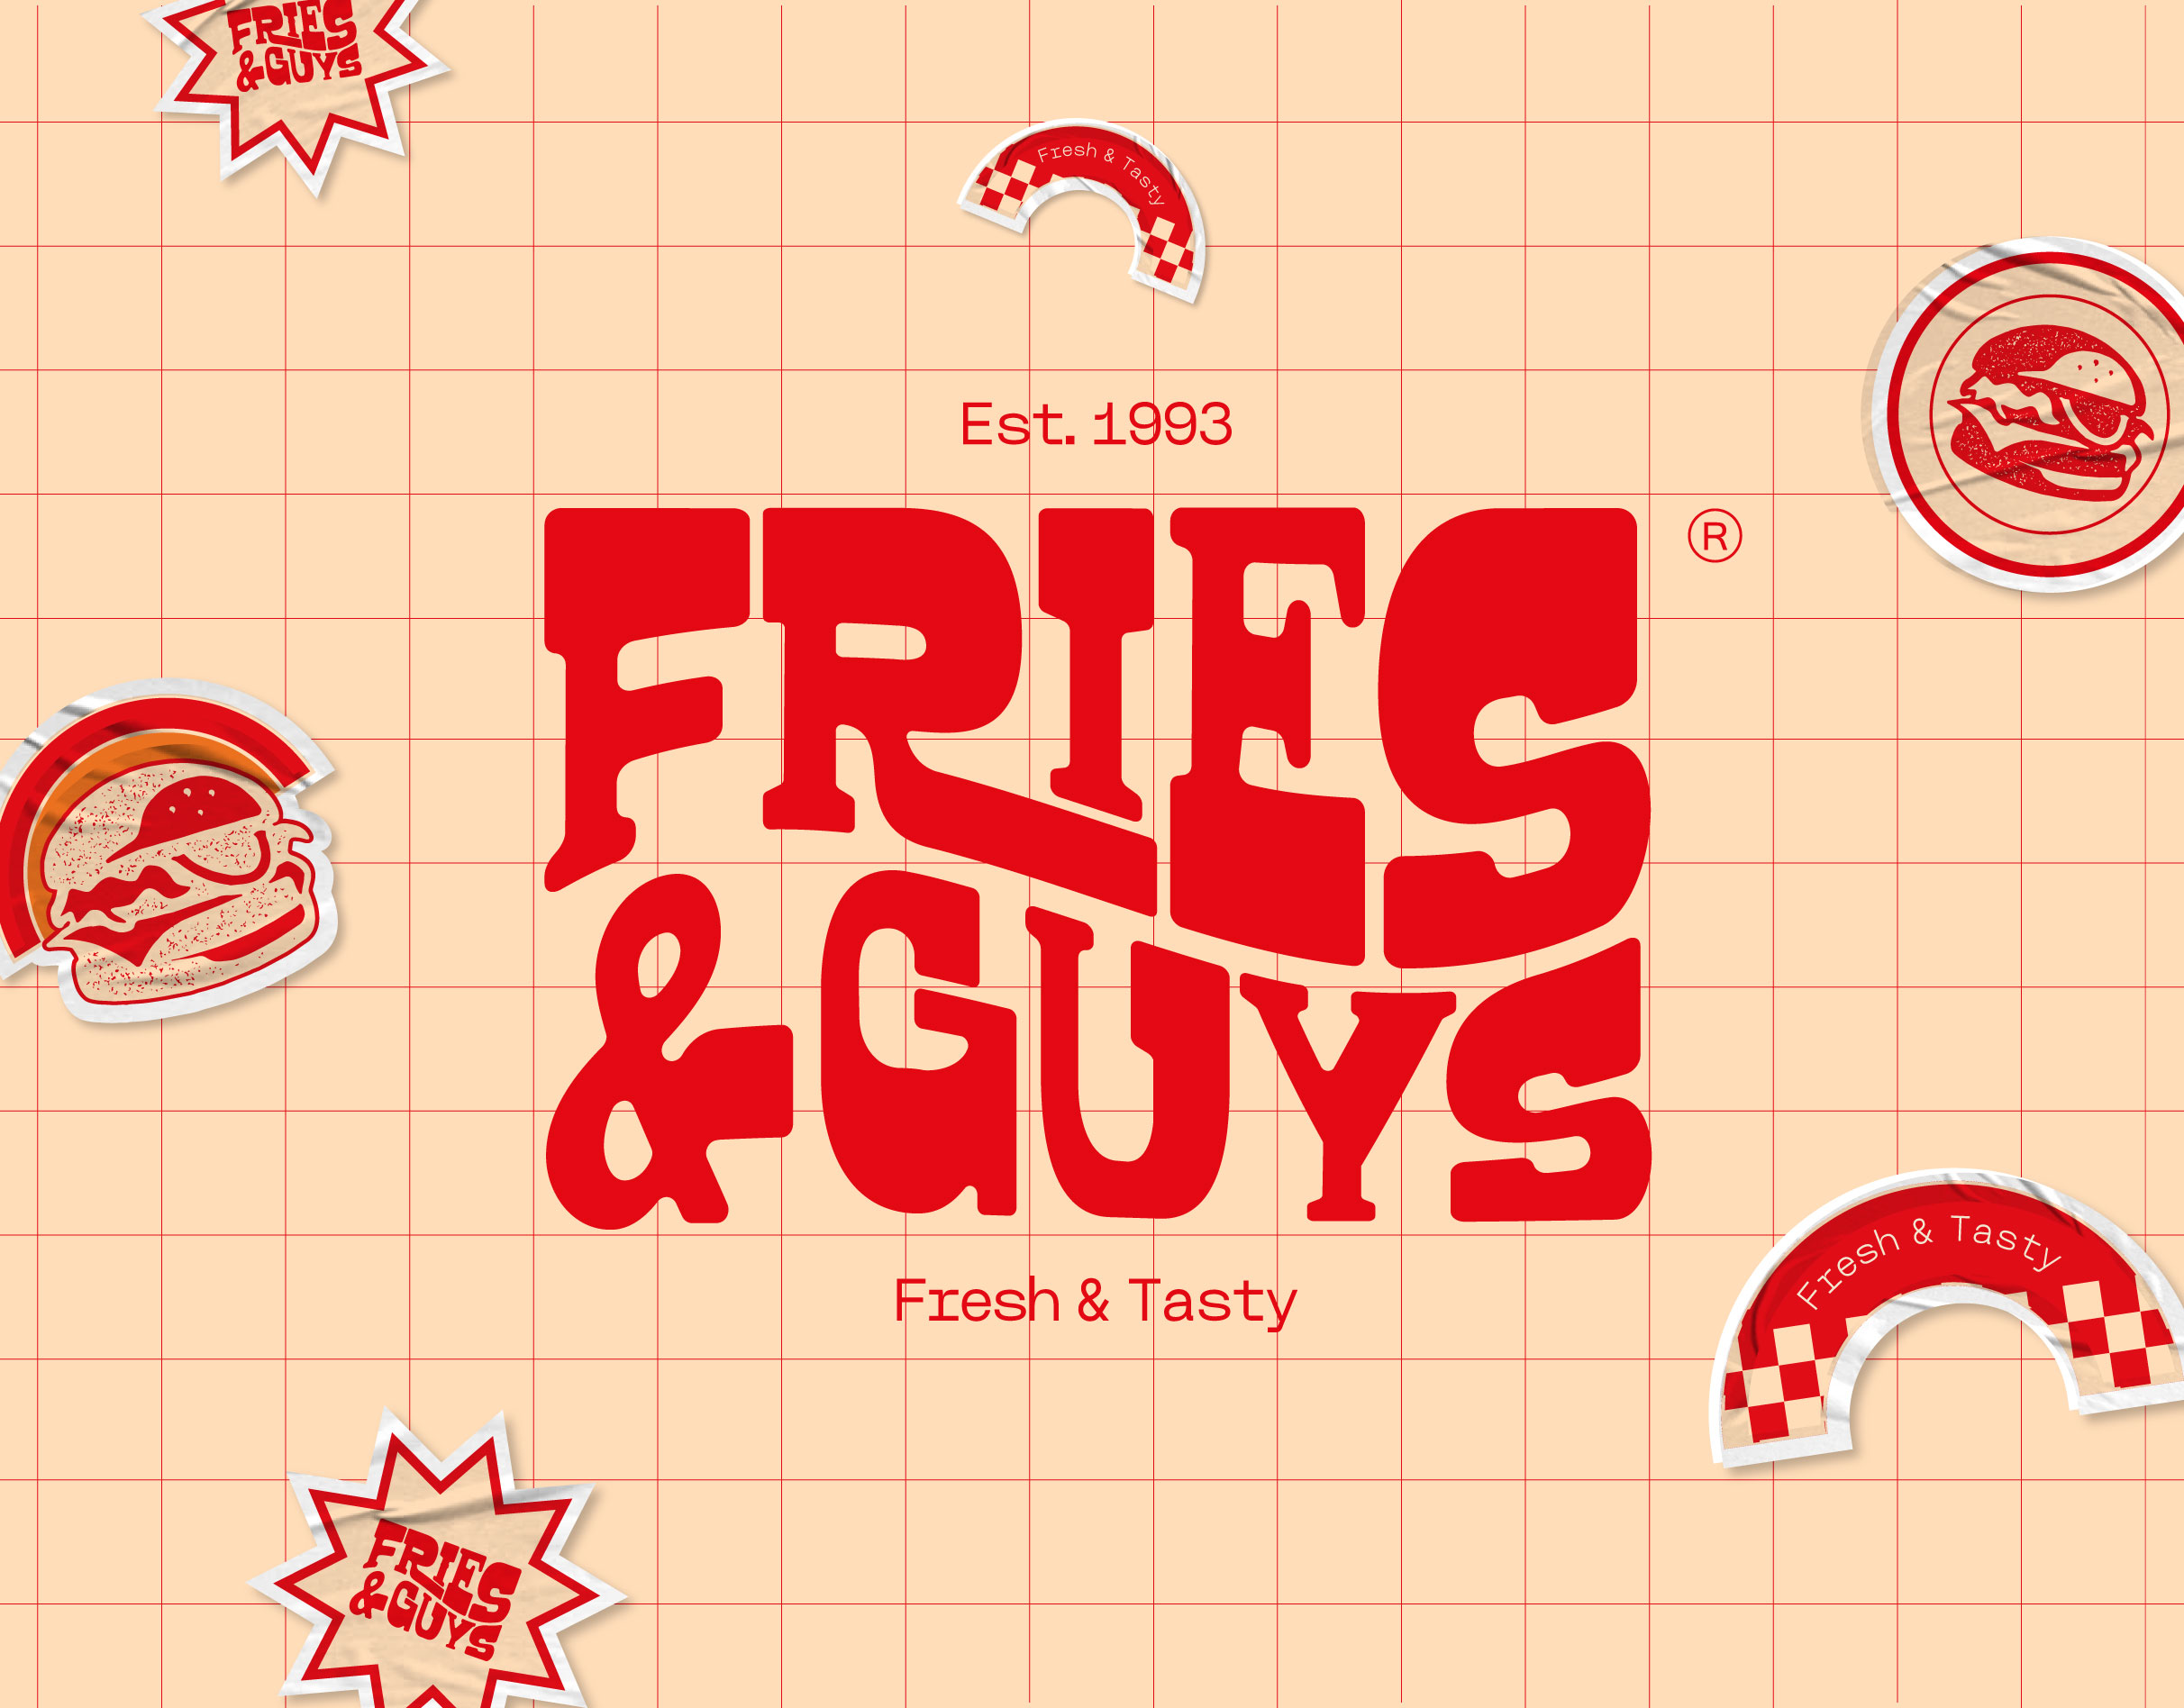 Fries & Guys – A 90s Retro Diner Is Calling You!